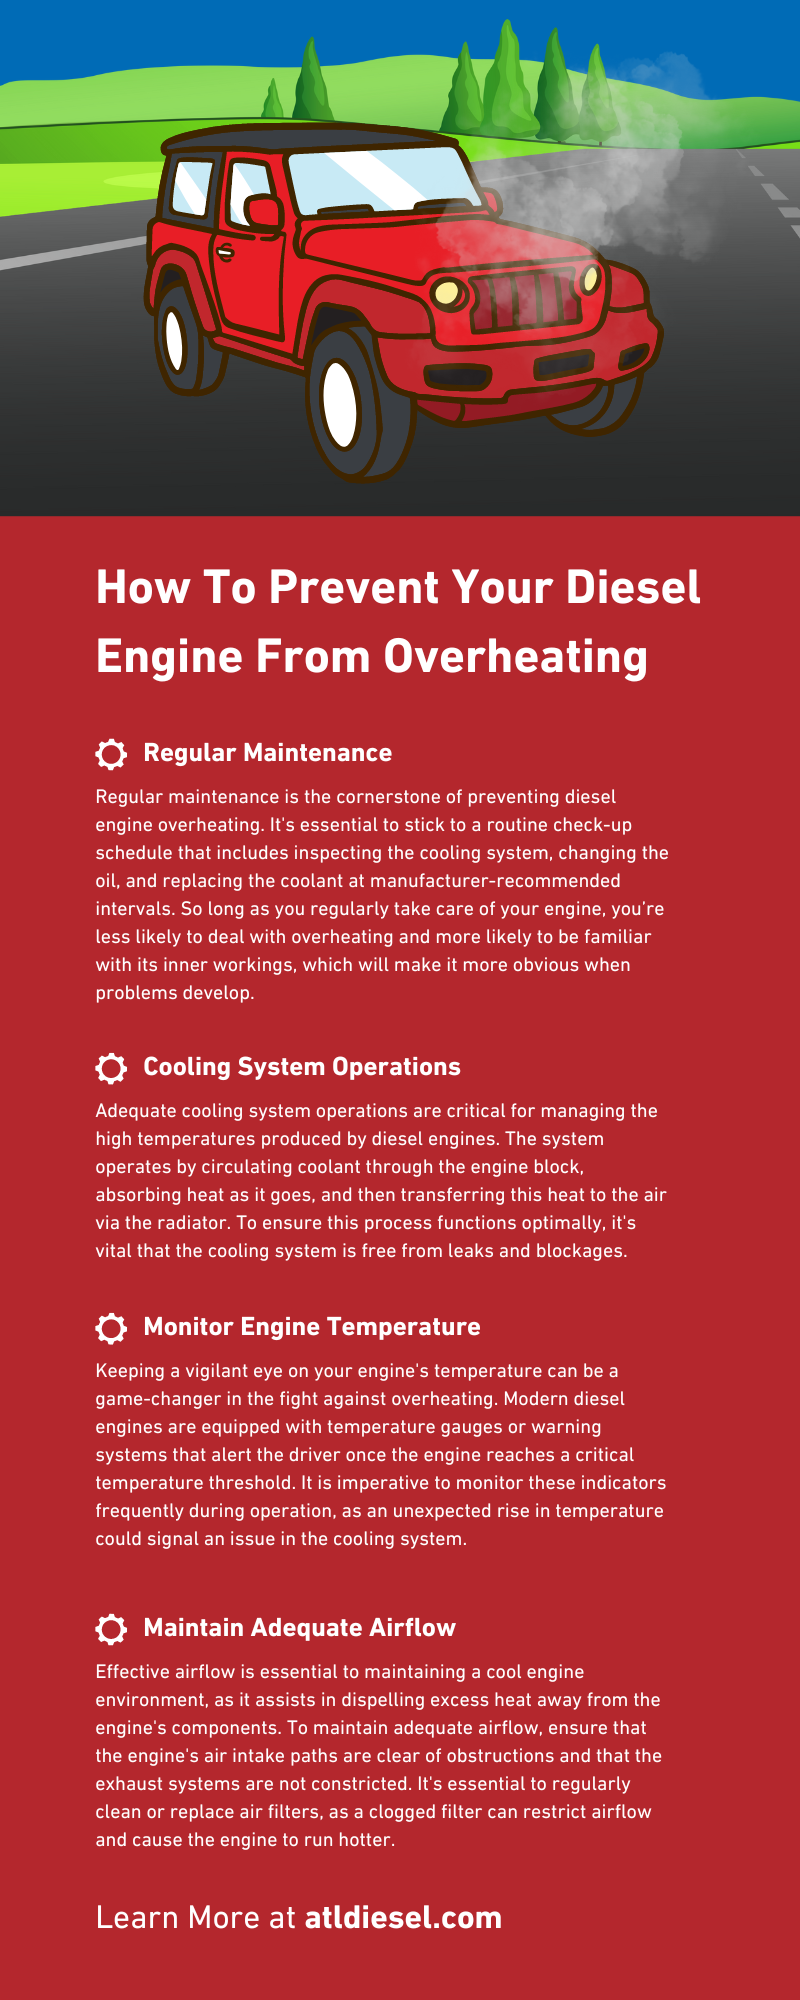 How To Prevent Your Diesel Engine From Overheating